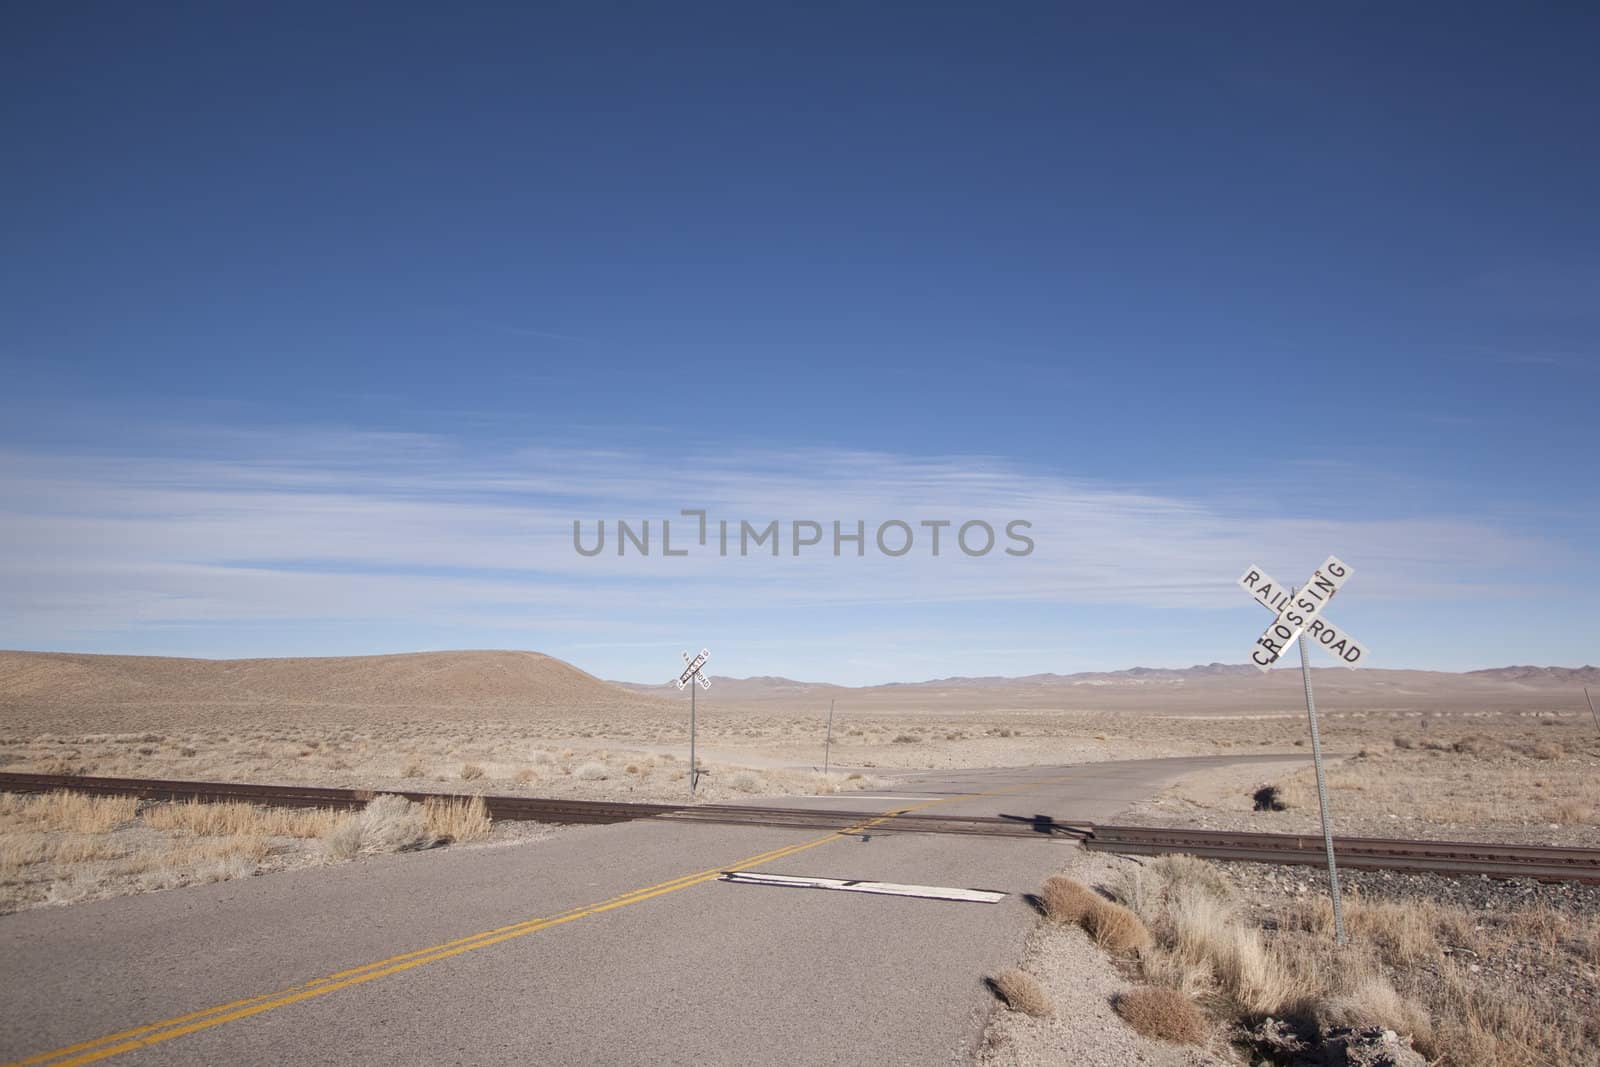 Railroad crossing tracks in the desert with blue skies.